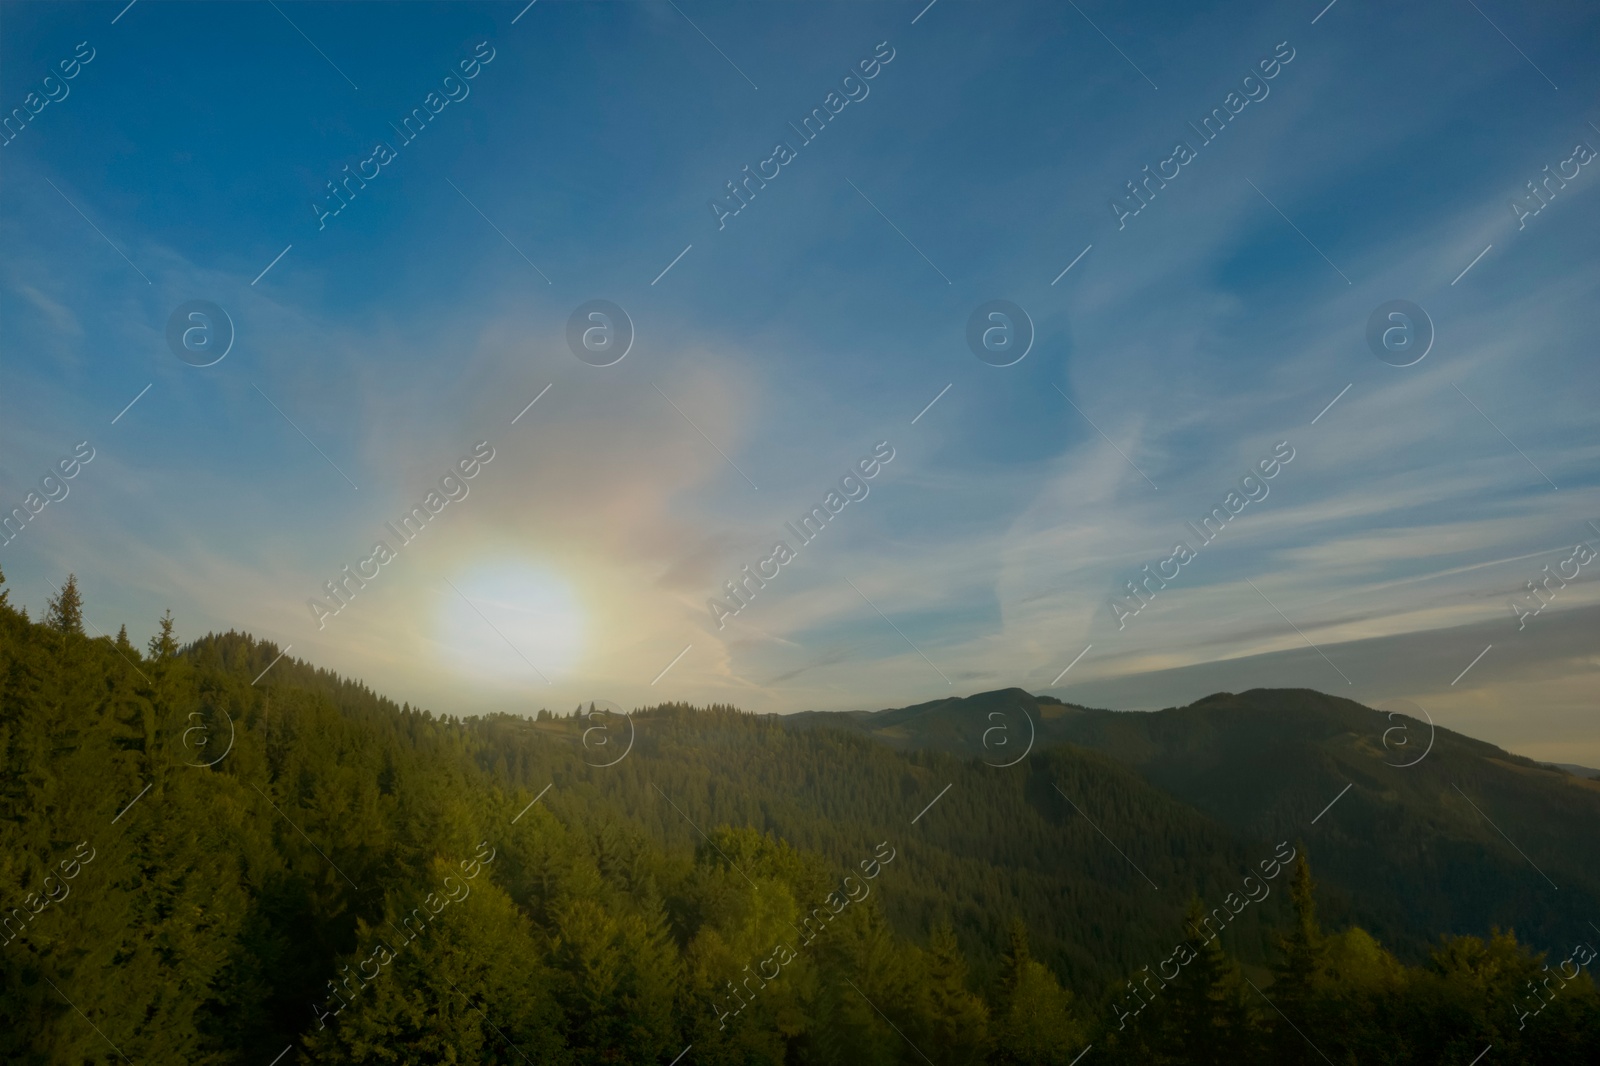 Image of Aerial view of beautiful mountain landscape with green trees in morning